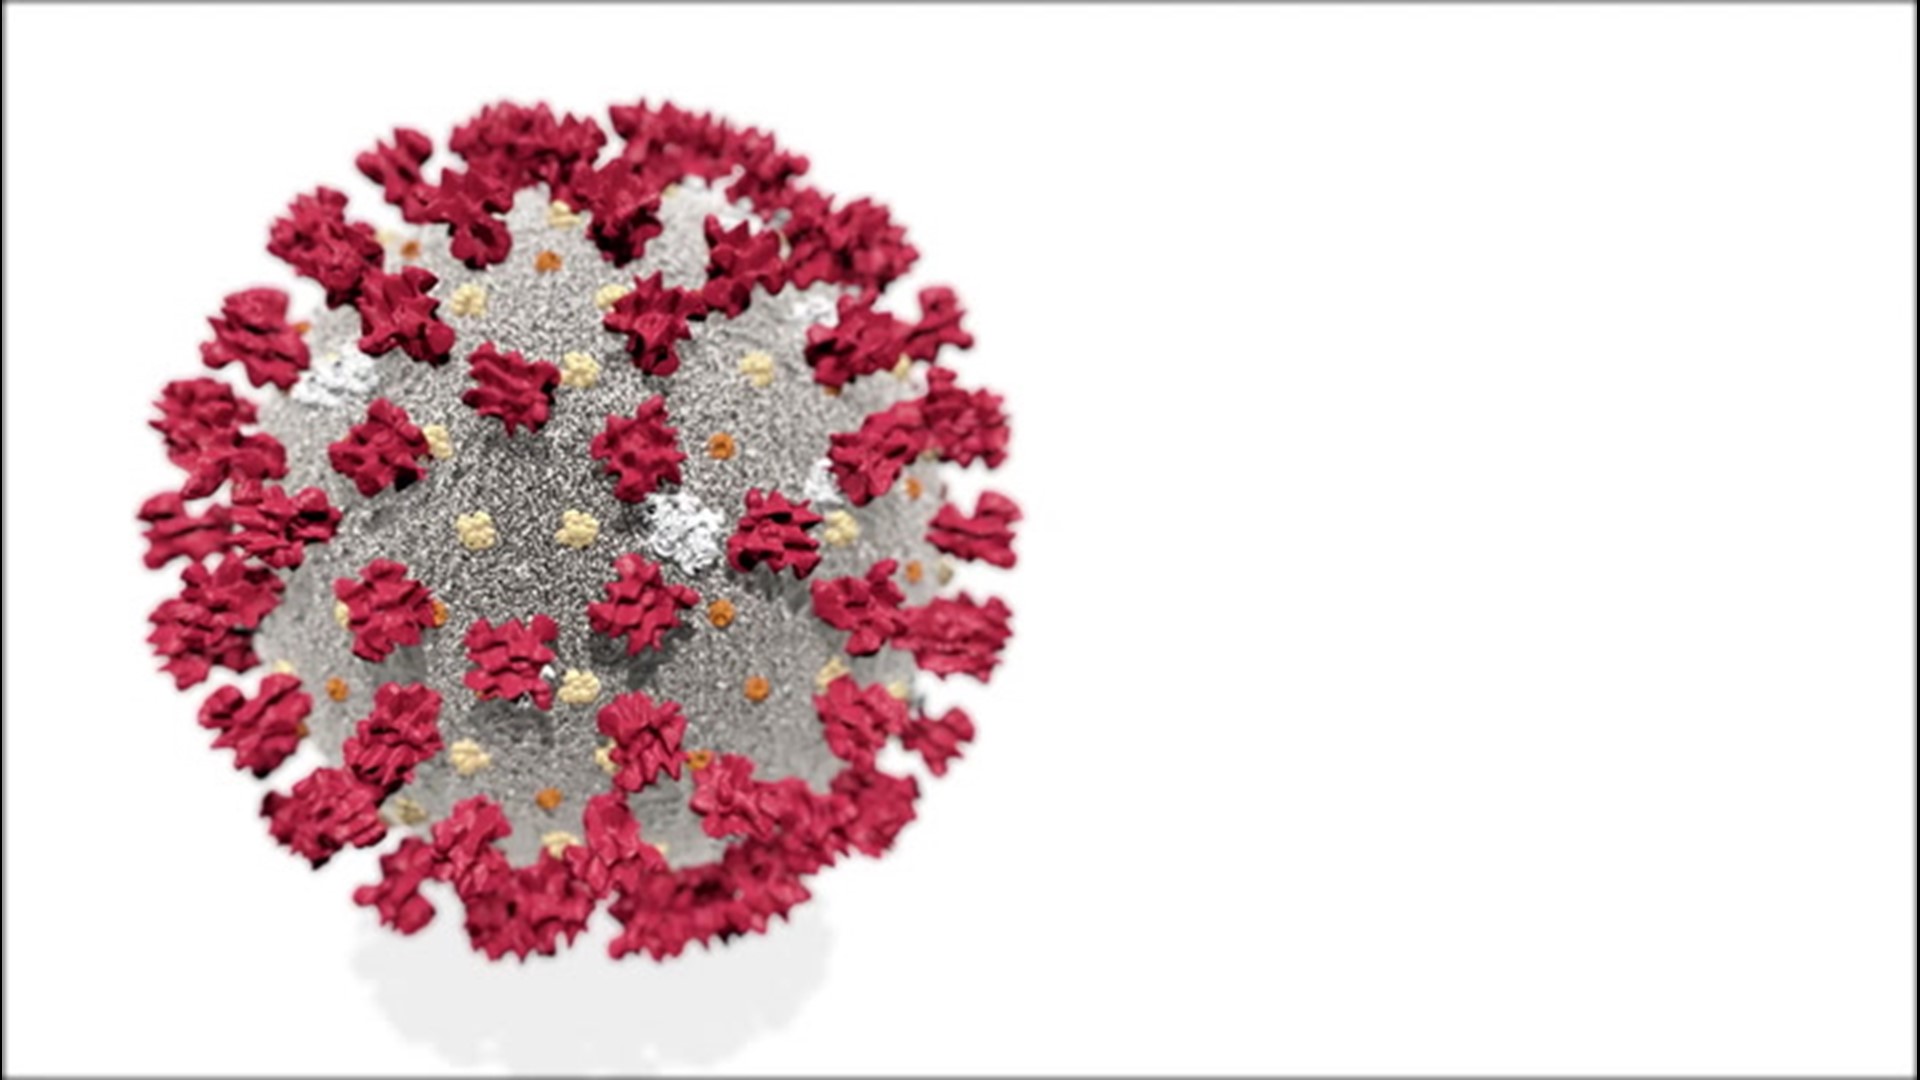 AccuWeather answers some of the most asked questions about the coronavirus.